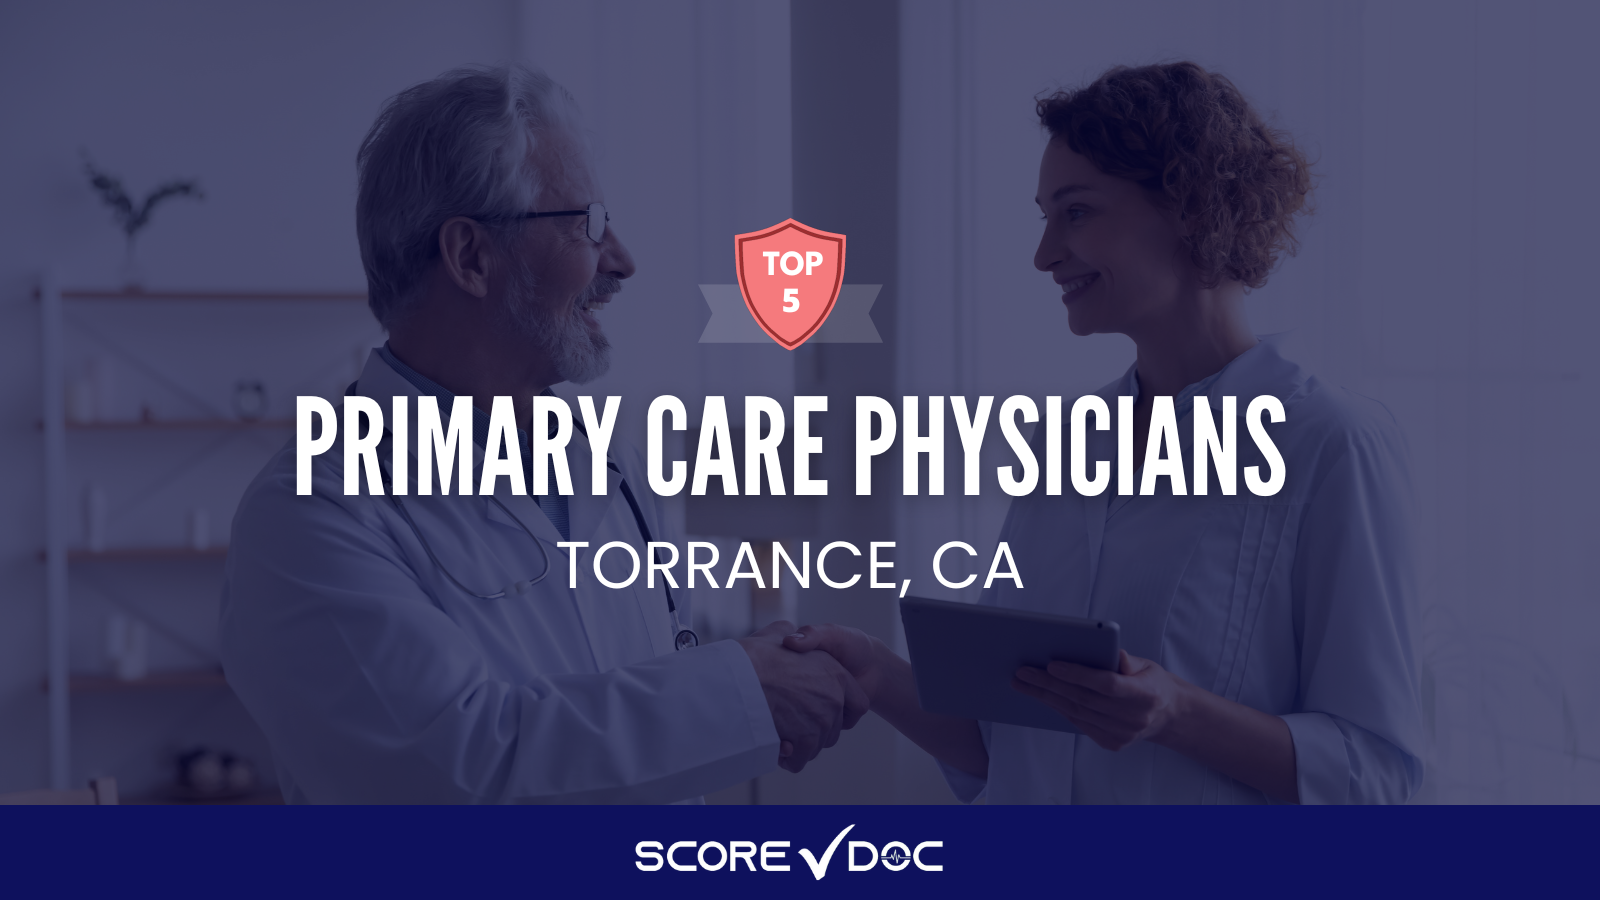 5 Best Primary Care Physicians in Torrance, CA